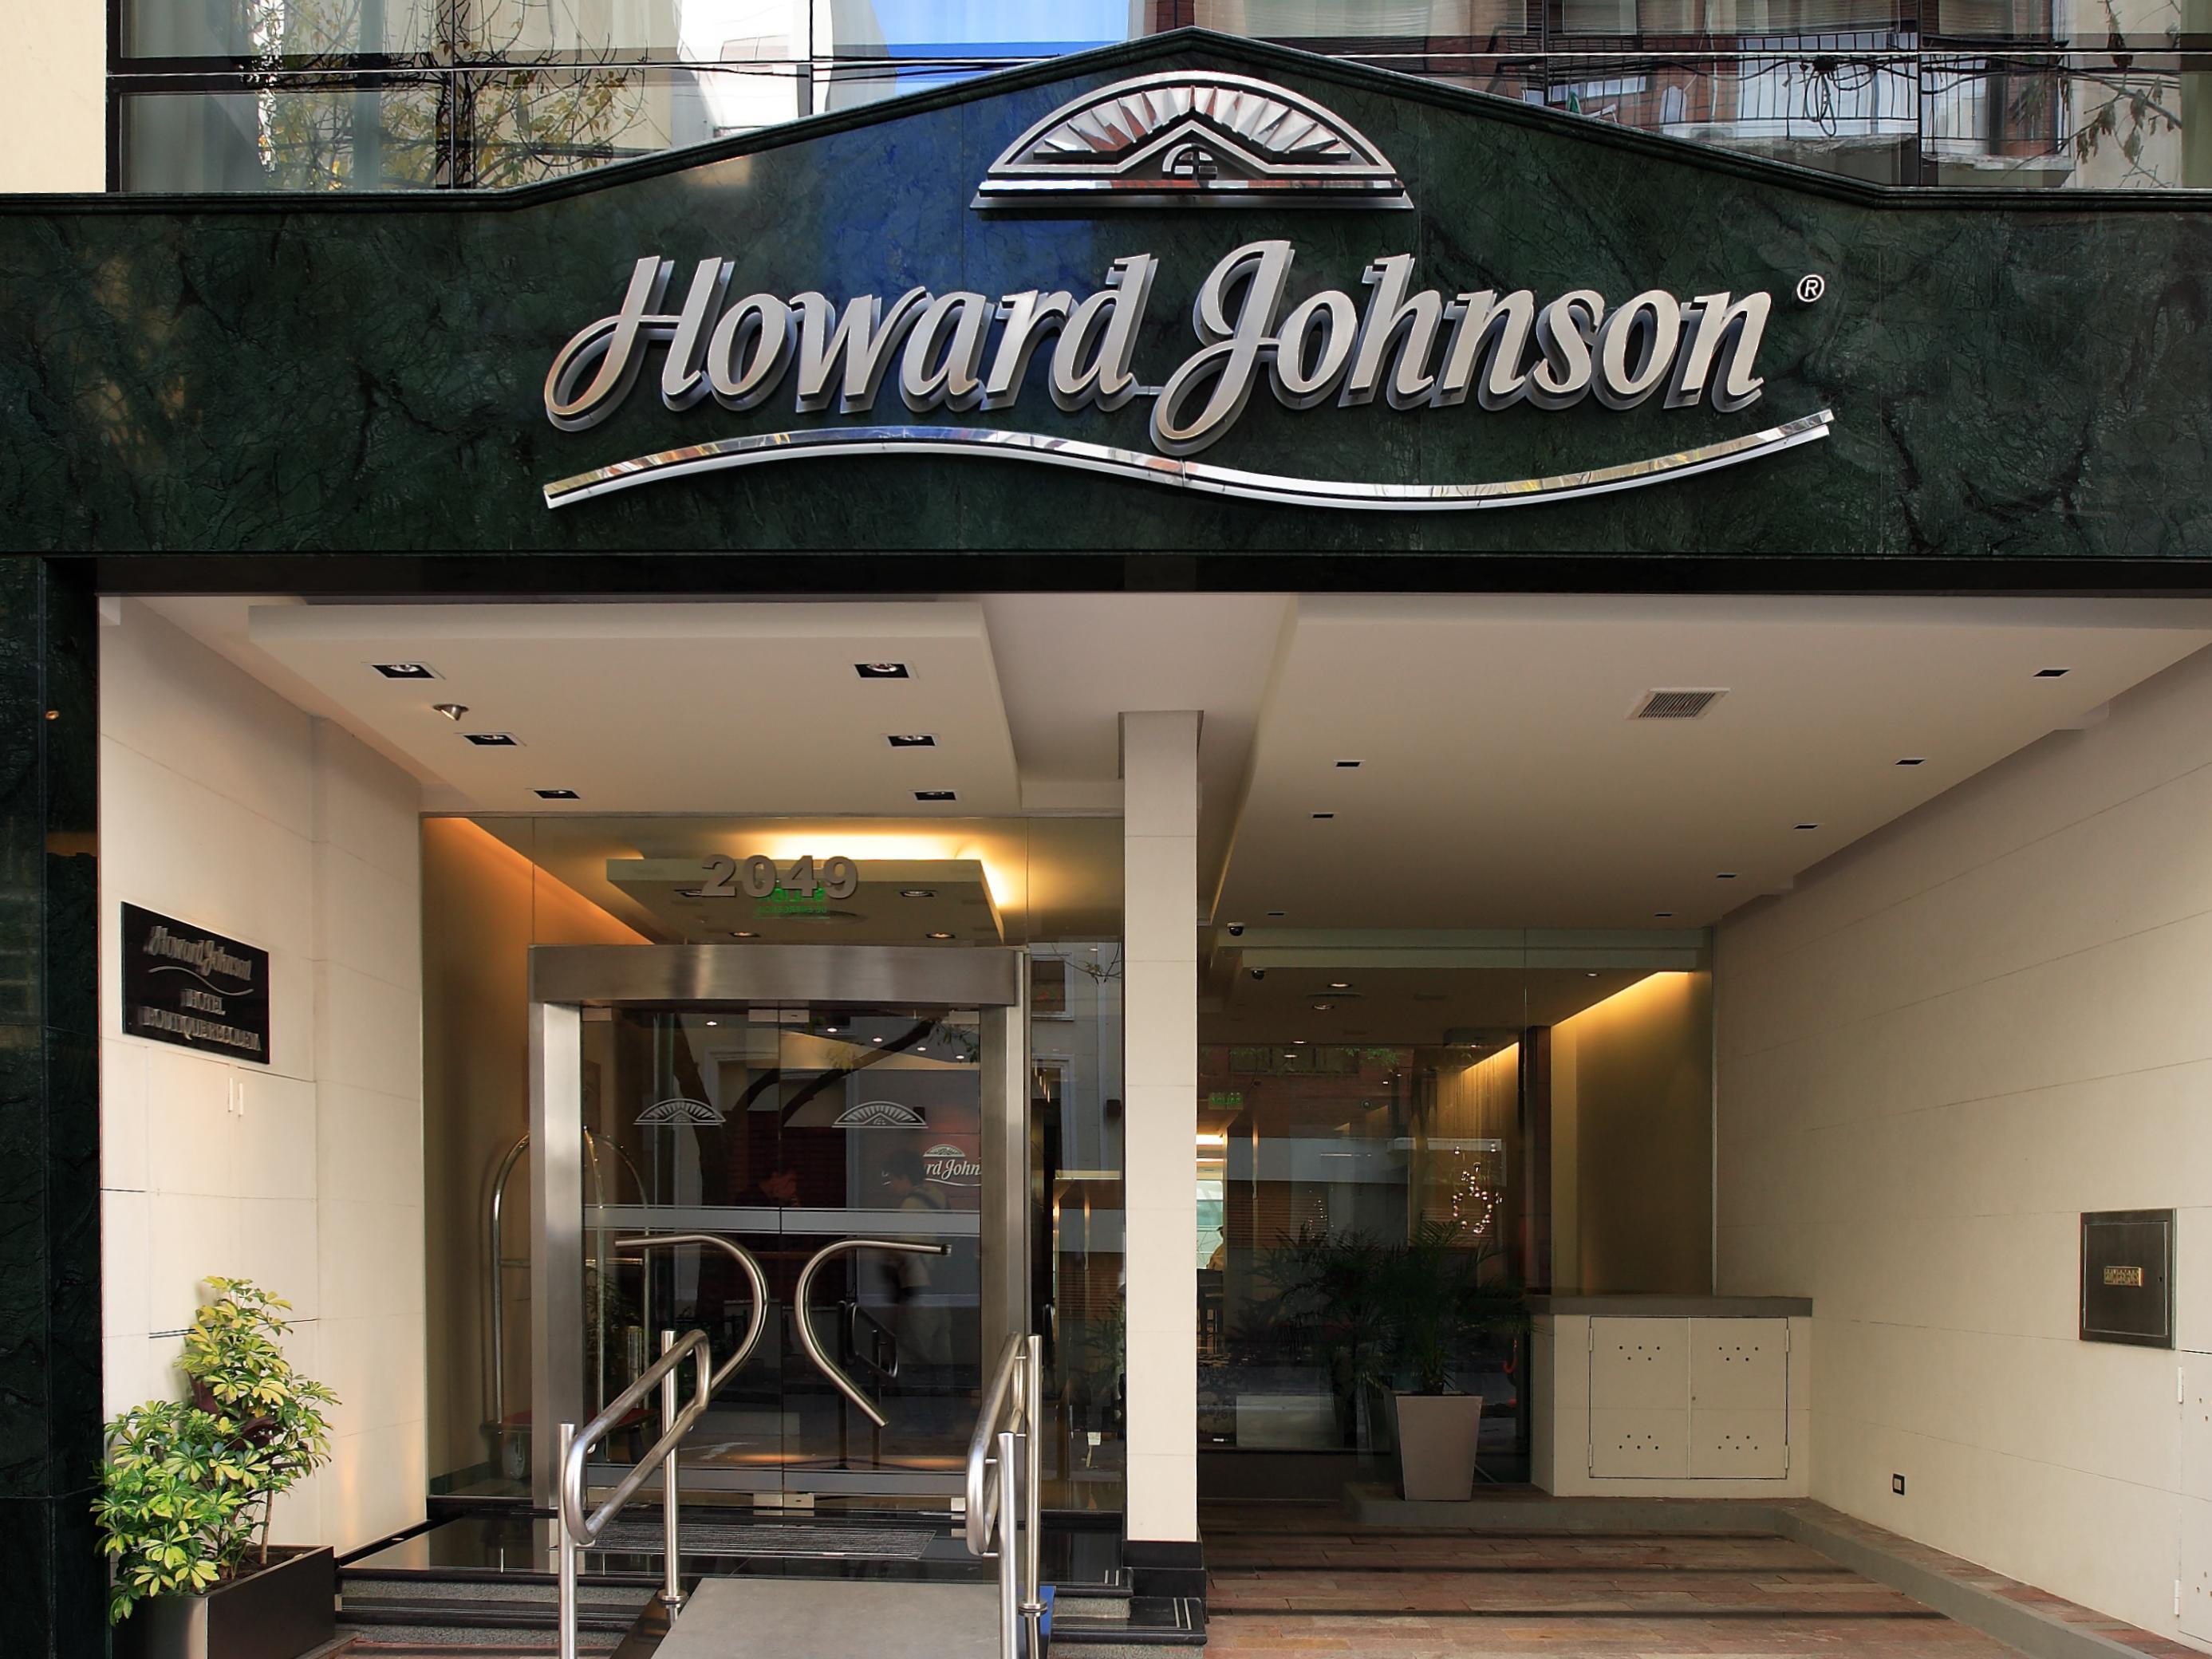 Howard Johnson Hotel Boutique Recoleta Booking,Howard Johnson Hotel Boutique Recoleta Resort,Howard Johnson Hotel Boutique Recoleta reservation,Howard Johnson Hotel Boutique Recoleta deals,Howard Johnson Hotel Boutique Recoleta Phone Number,Howard Johnson Hotel Boutique Recoleta website,Howard Johnson Hotel Boutique Recoleta E-mail,Howard Johnson Hotel Boutique Recoleta address,Howard Johnson Hotel Boutique Recoleta Overview,Rooms & Rates,Howard Johnson Hotel Boutique Recoleta Photos,Howard Johnson Hotel Boutique Recoleta Location Amenities,Howard Johnson Hotel Boutique Recoleta Q&A,Howard Johnson Hotel Boutique Recoleta Map,Howard Johnson Hotel Boutique Recoleta Gallery,Howard Johnson Hotel Boutique Recoleta Buenos Aires 2016, Buenos Aires Howard Johnson Hotel Boutique Recoleta room types 2016, Buenos Aires Howard Johnson Hotel Boutique Recoleta price 2016, Howard Johnson Hotel Boutique Recoleta in Buenos Aires 2016, Buenos Aires Howard Johnson Hotel Boutique Recoleta address, Howard Johnson Hotel Boutique Recoleta Buenos Aires booking online, Buenos Aires Howard Johnson Hotel Boutique Recoleta travel services, Buenos Aires Howard Johnson Hotel Boutique Recoleta pick up services.